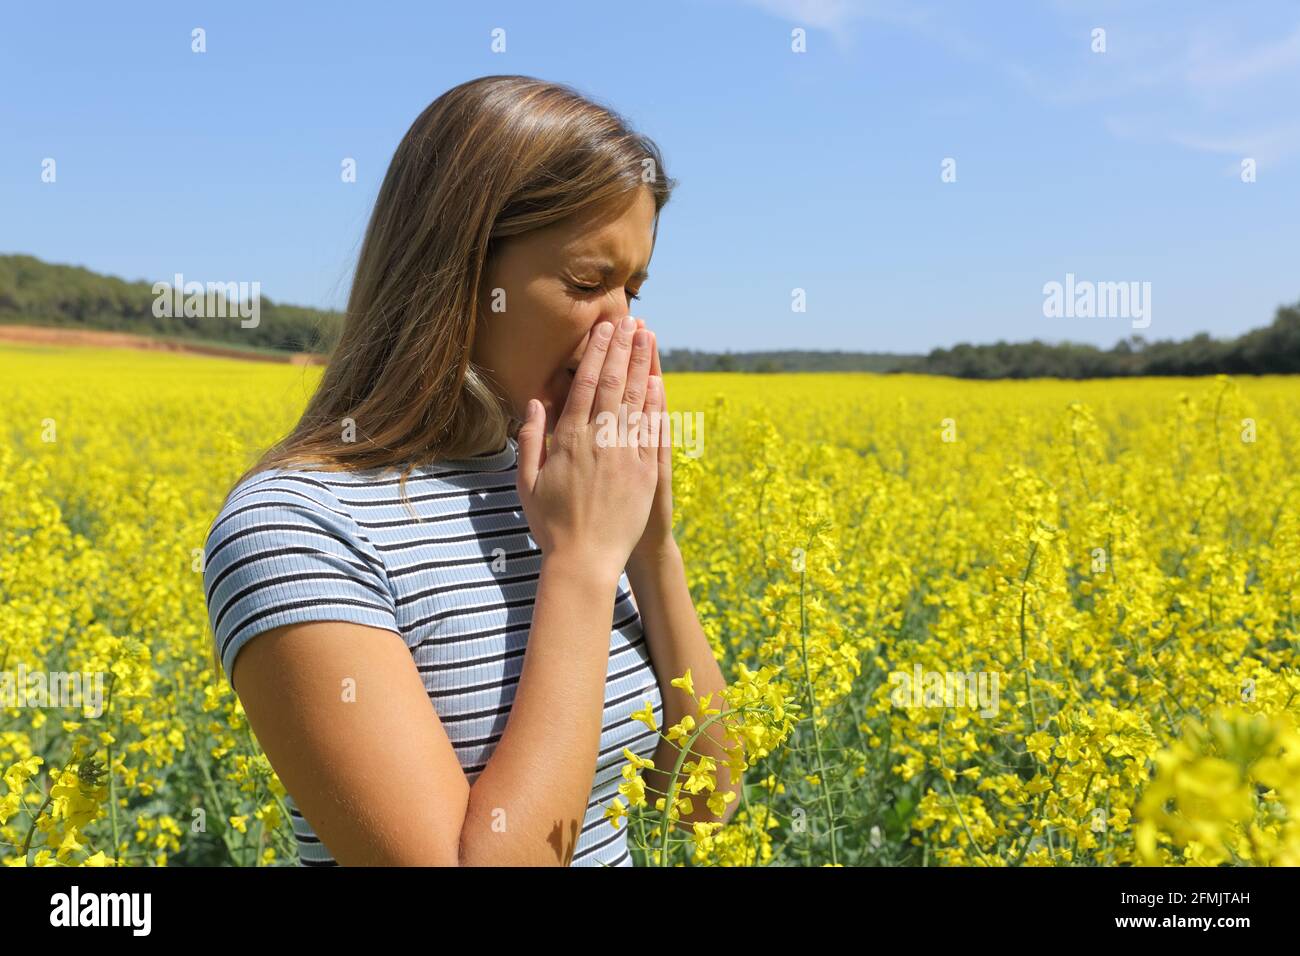 Allergic woman coughing covering mouth with her hands in a yellow field Stock Photo